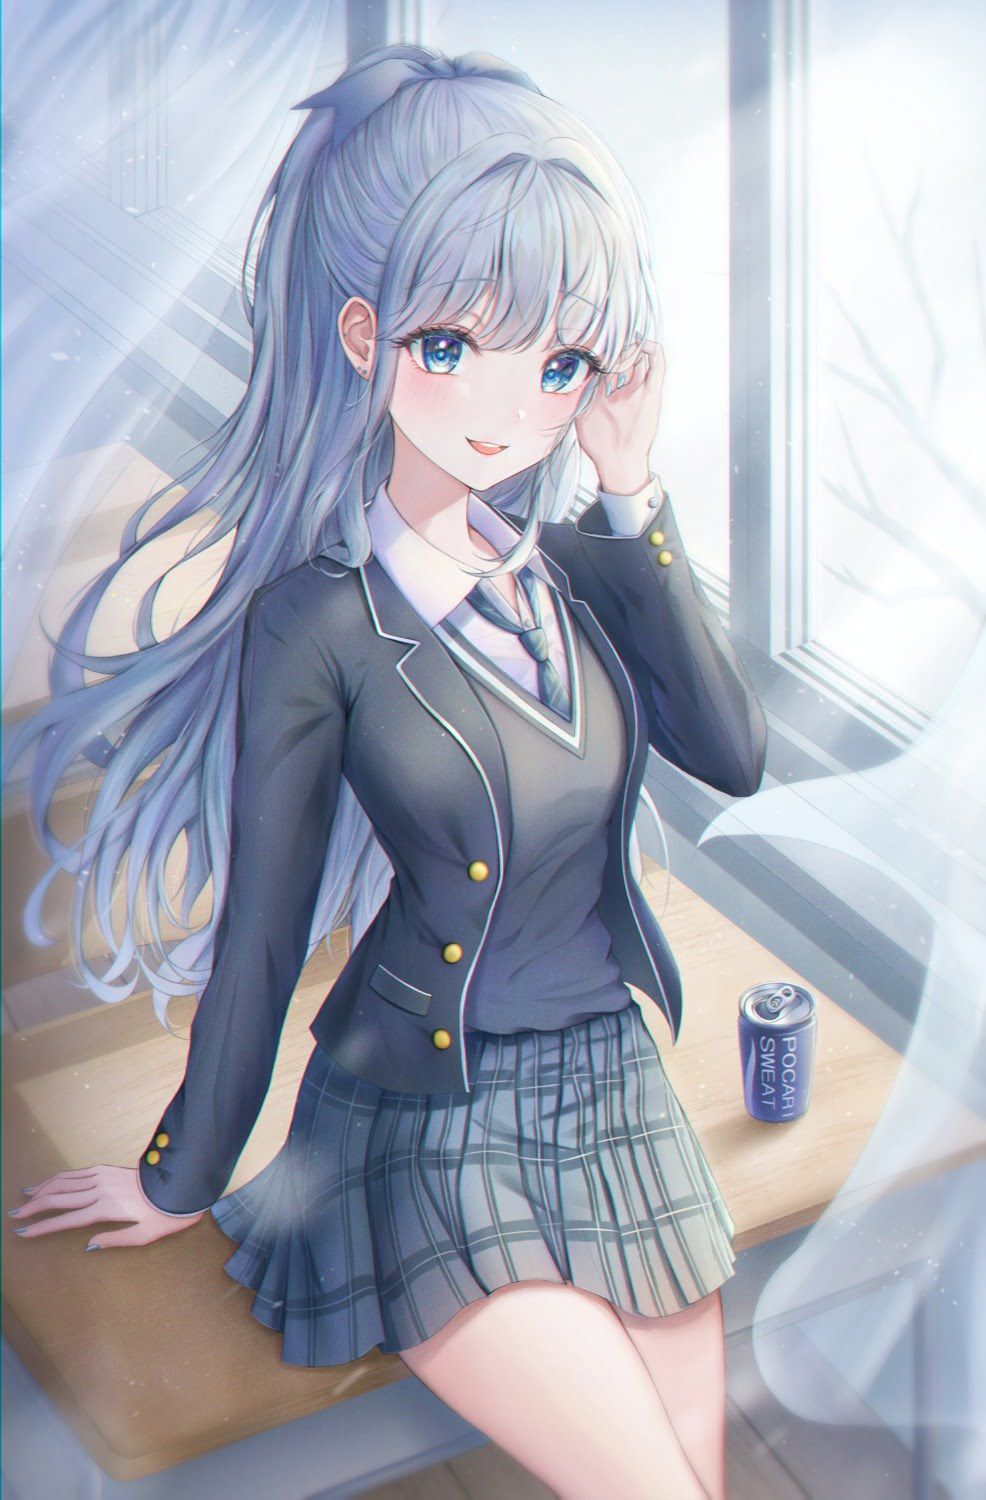 Sometimes this is good! Thursday morning starting with a refreshing and cute uniform beautiful girl moe ~ 7